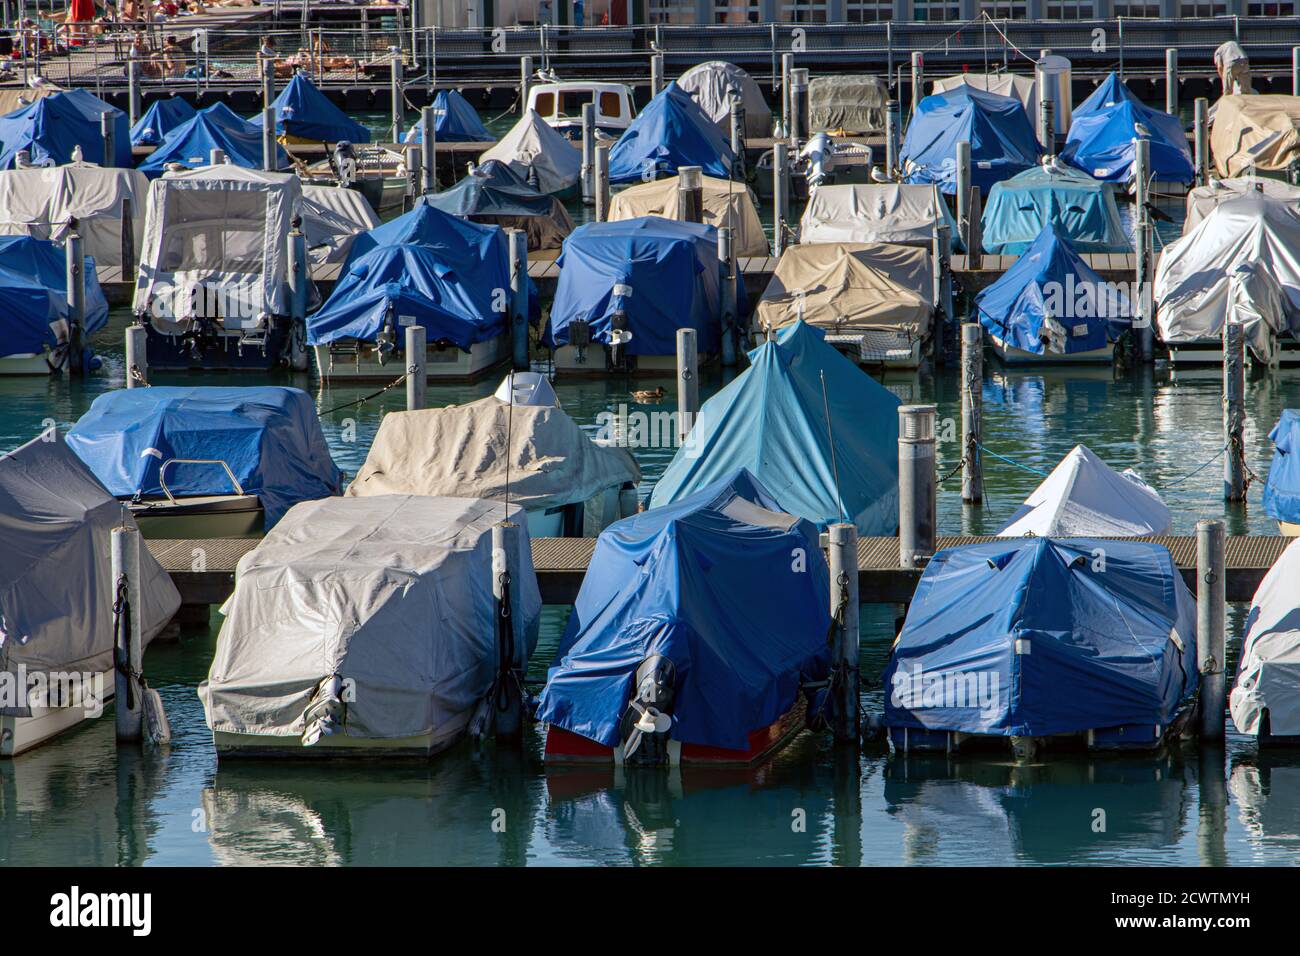 Boats moored in the harbor covered with blue tarps, Zurich, Switzerland. Stock Photo